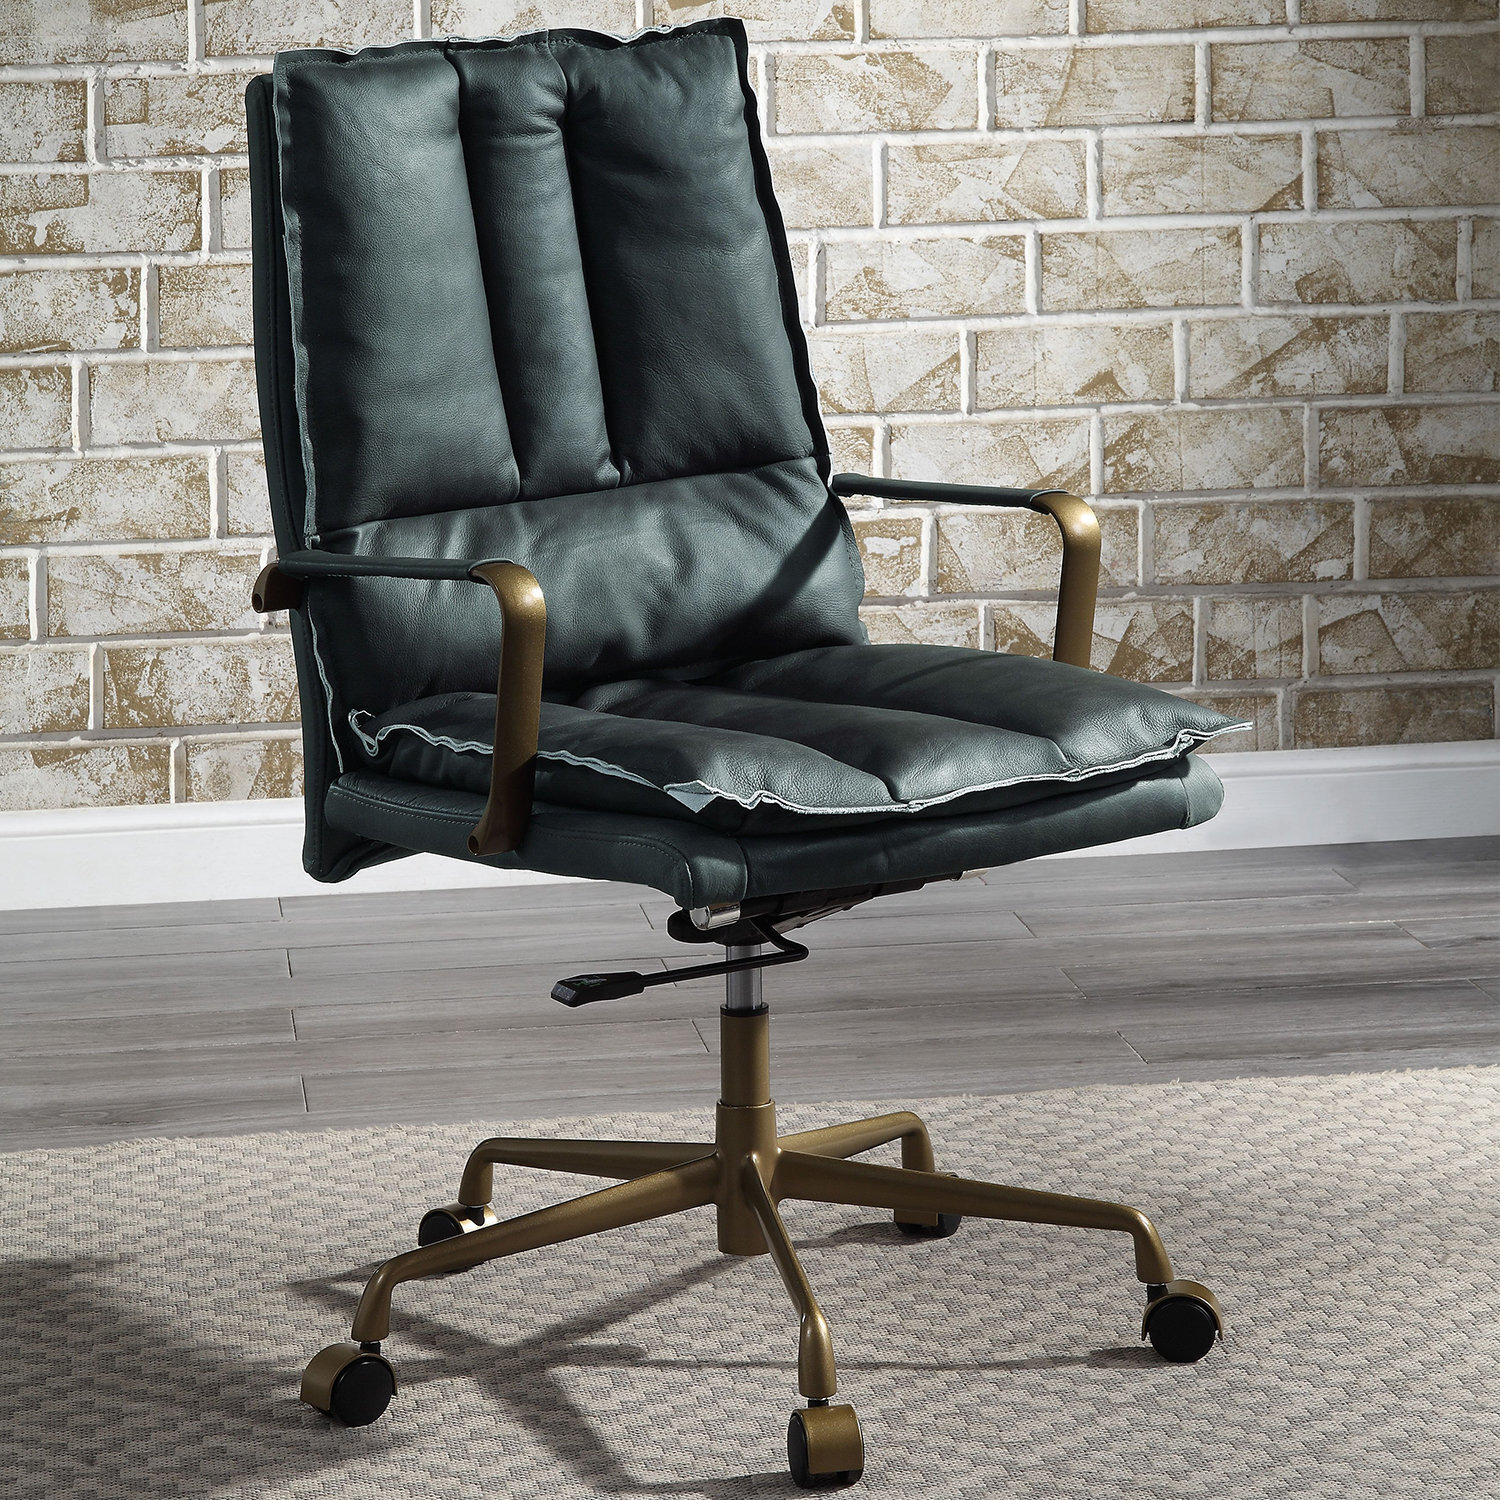 Green leather office executive chair with armrests